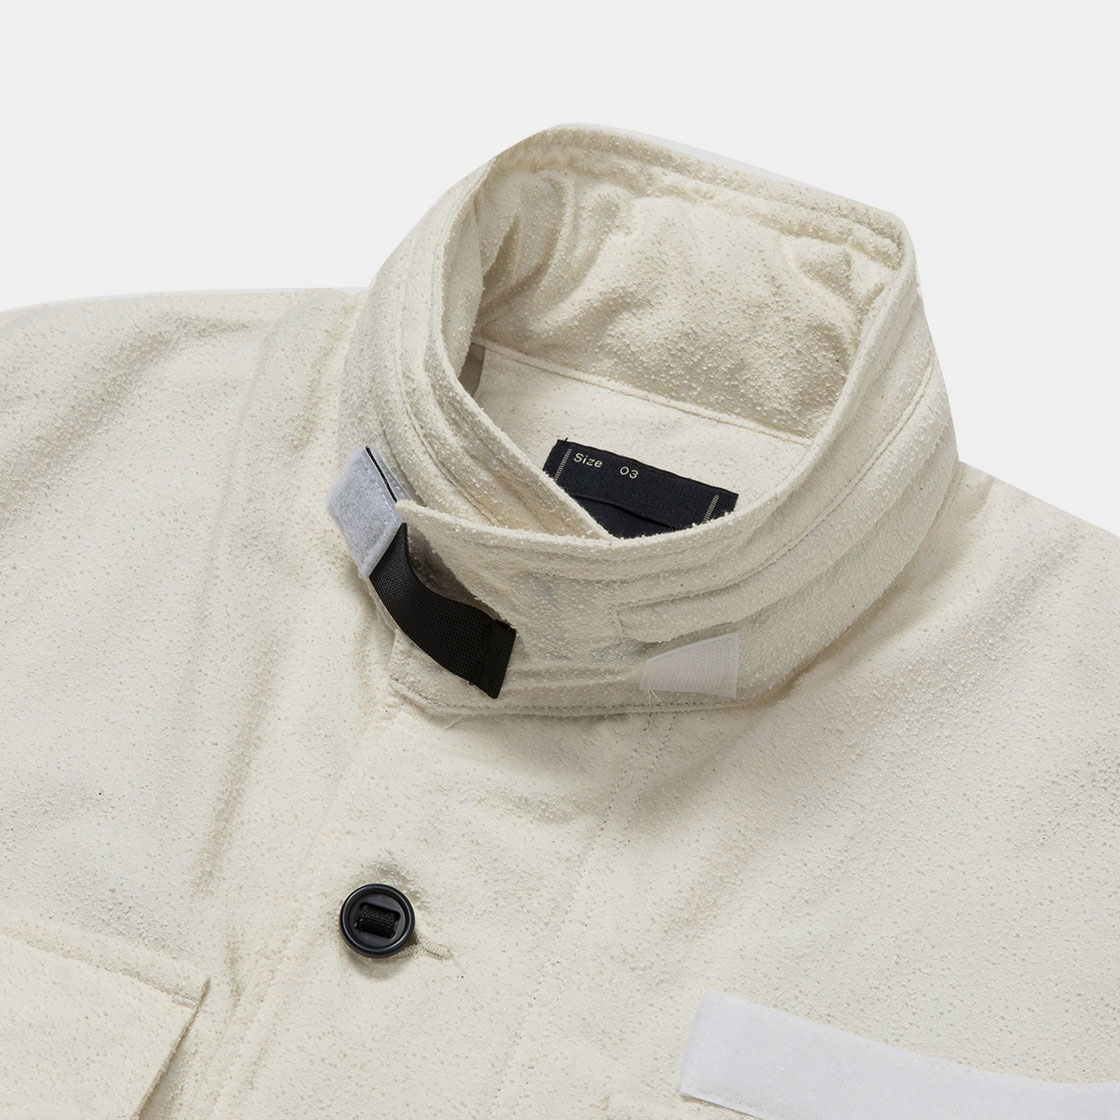 Imitation Suede Field JKT / Off White | meanswhile